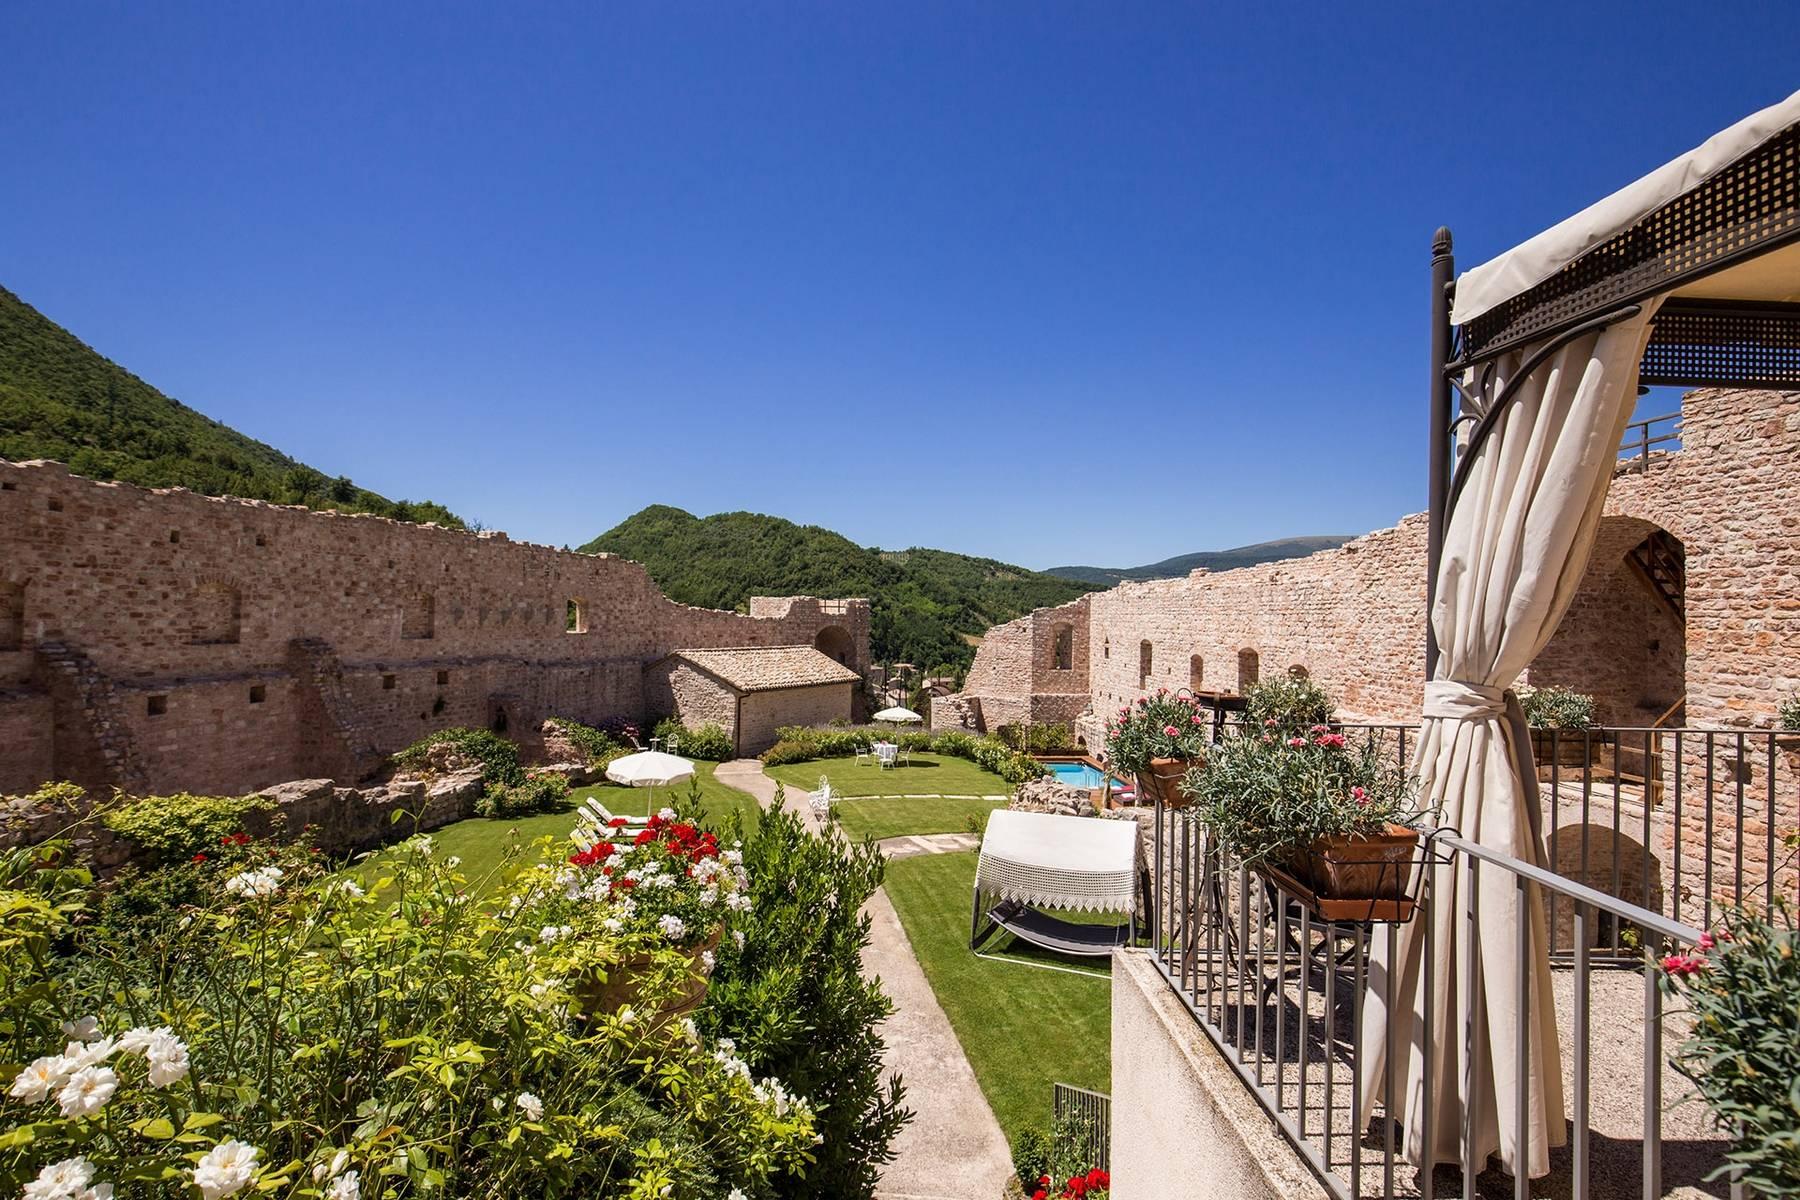 A magnificent castle in the Umbrian hillside - 10